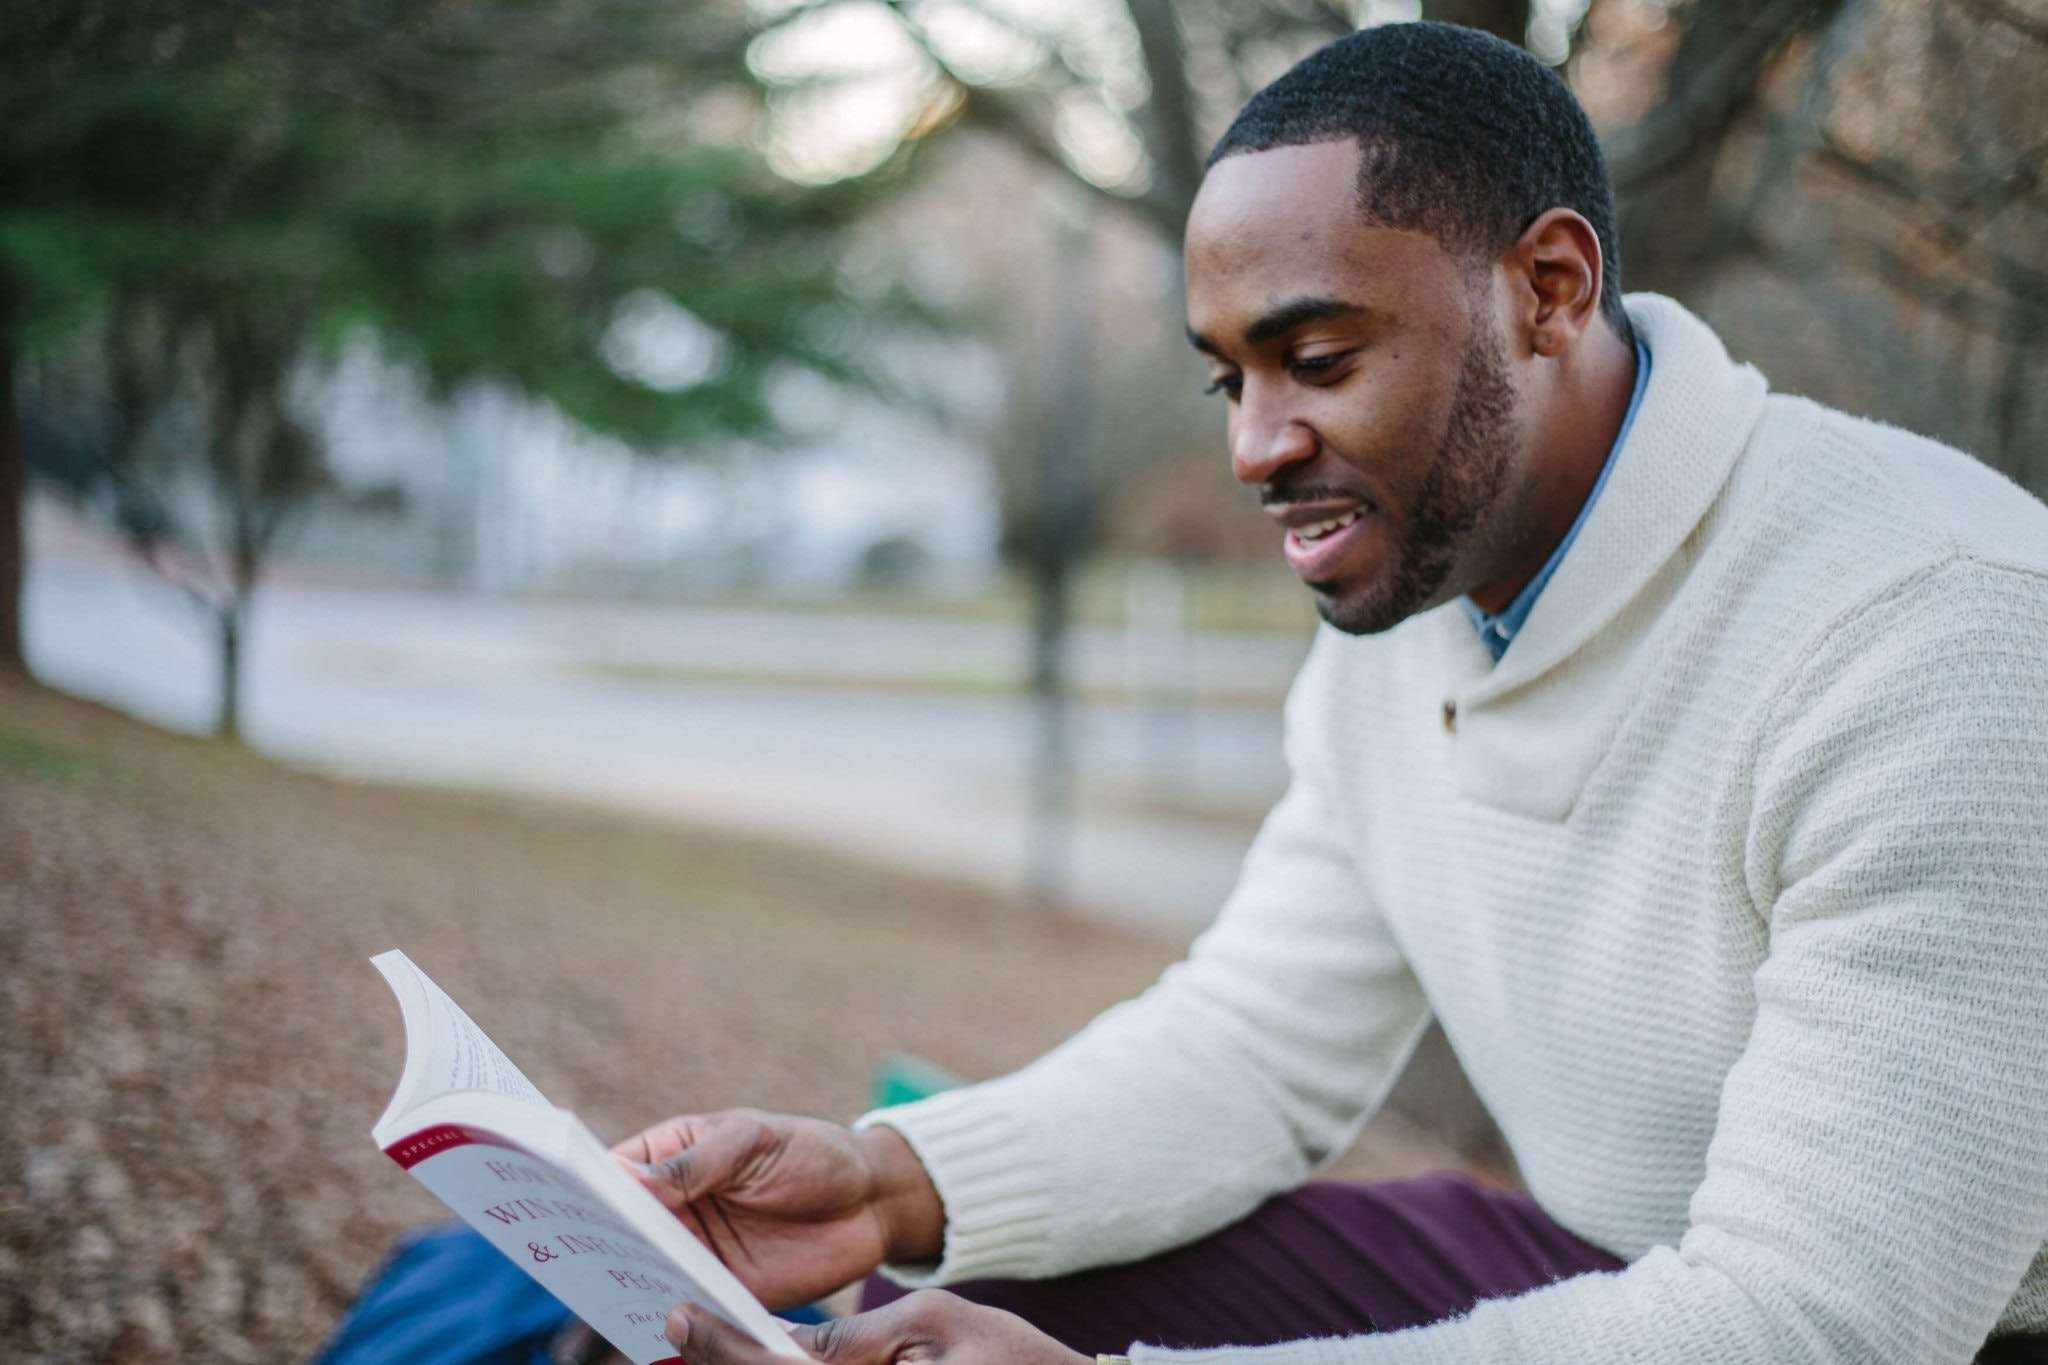 How to Improve Study Habits and Develop Better Learning Skills: 10 Simple but Powerful ways 